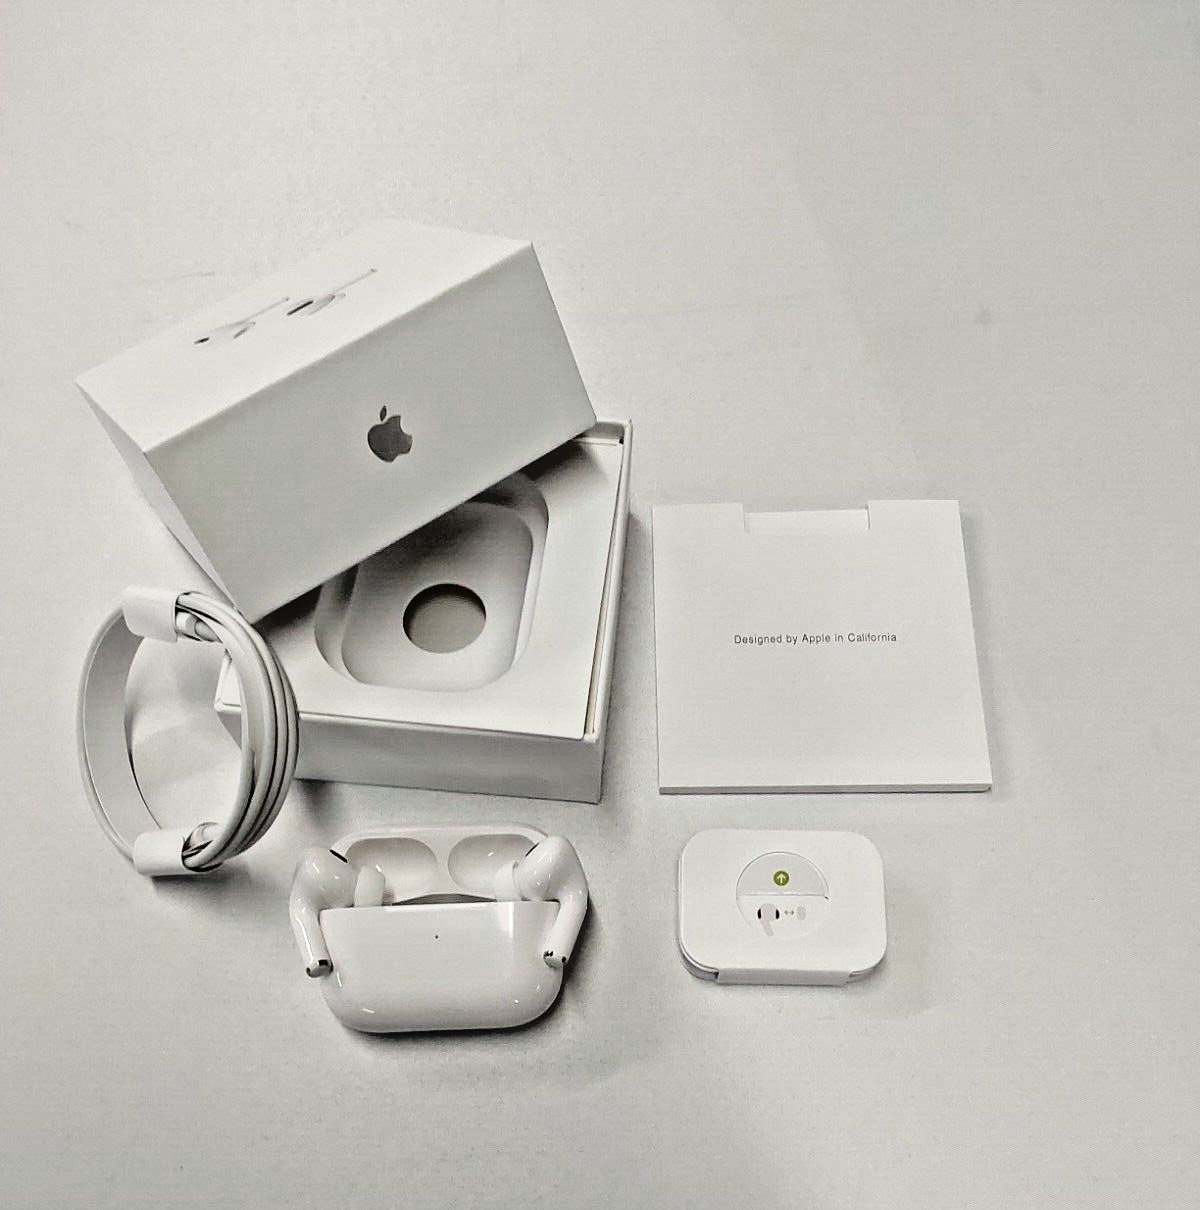 Apple Airpods Pro 2nd Generation Earbuds Earphones with MagSafe Charging Case